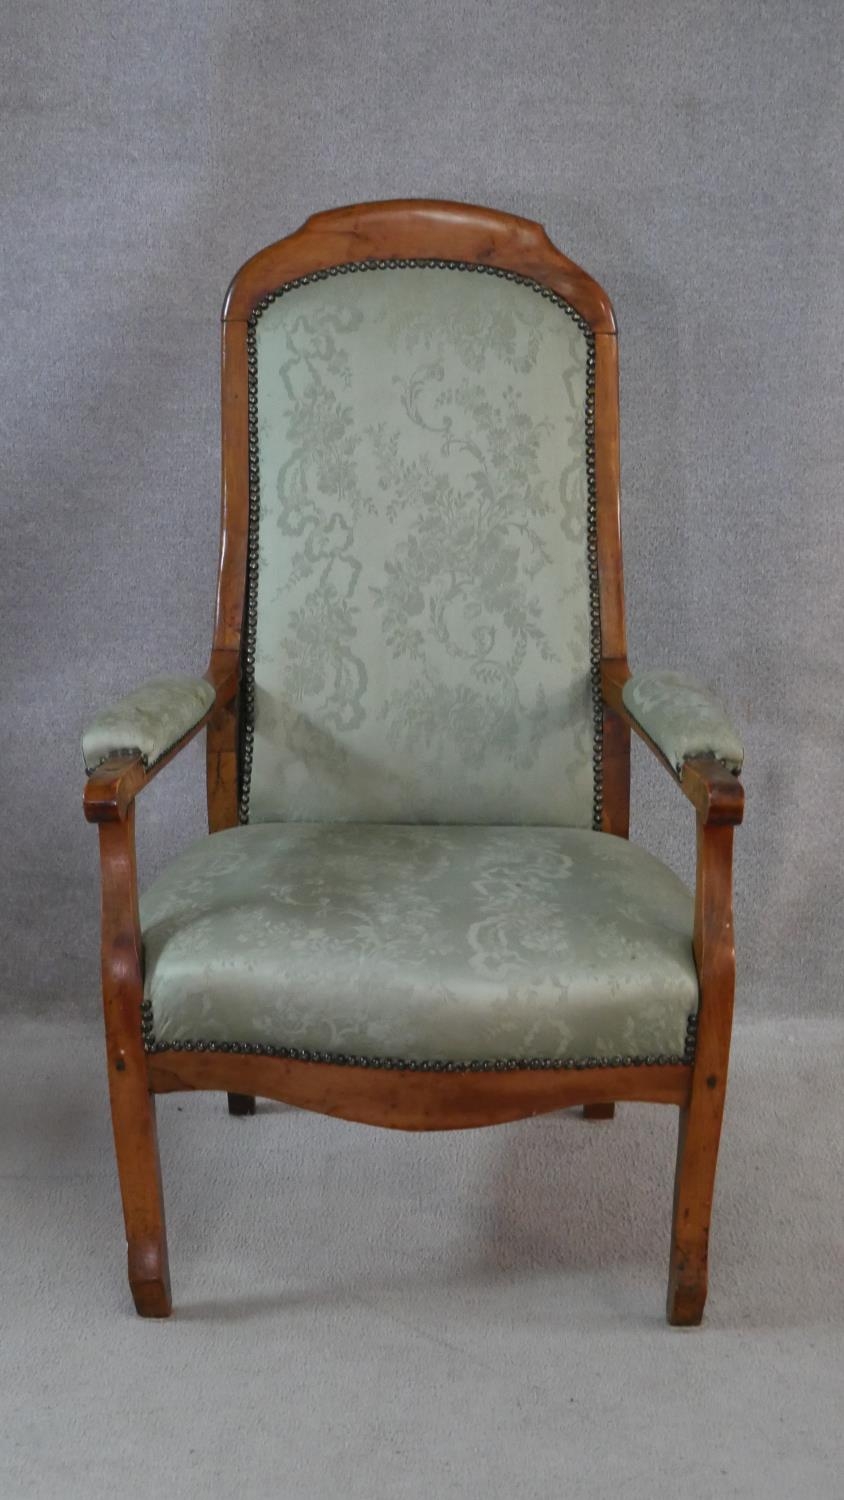 A 19th century French provincial fruitwood armchair in floral damask upholstery. H.109cm